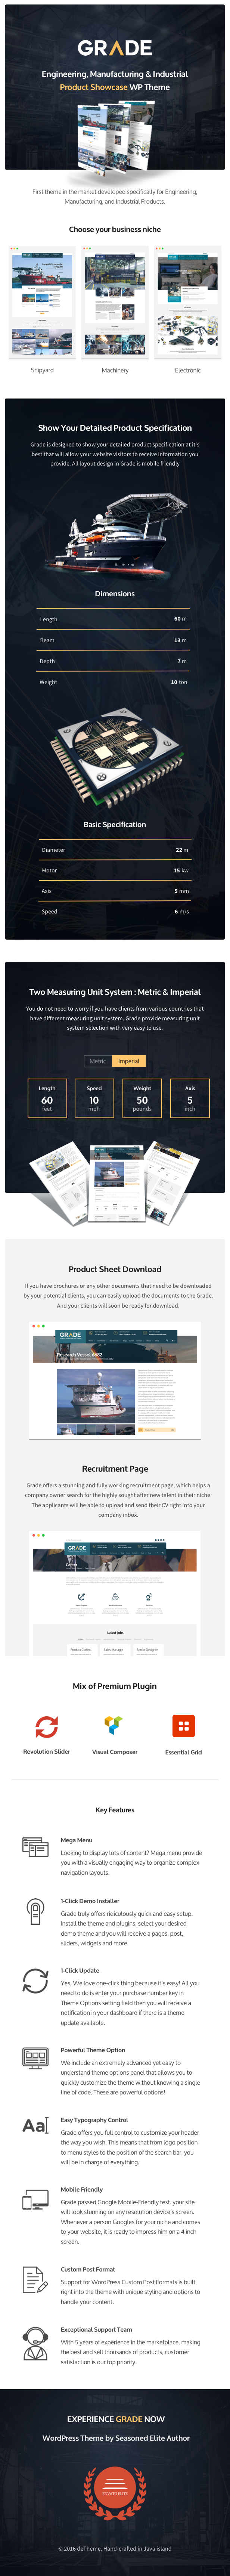 Grade - Engineering, Manufacturing & Industrial Product Showcase WP Theme - 1